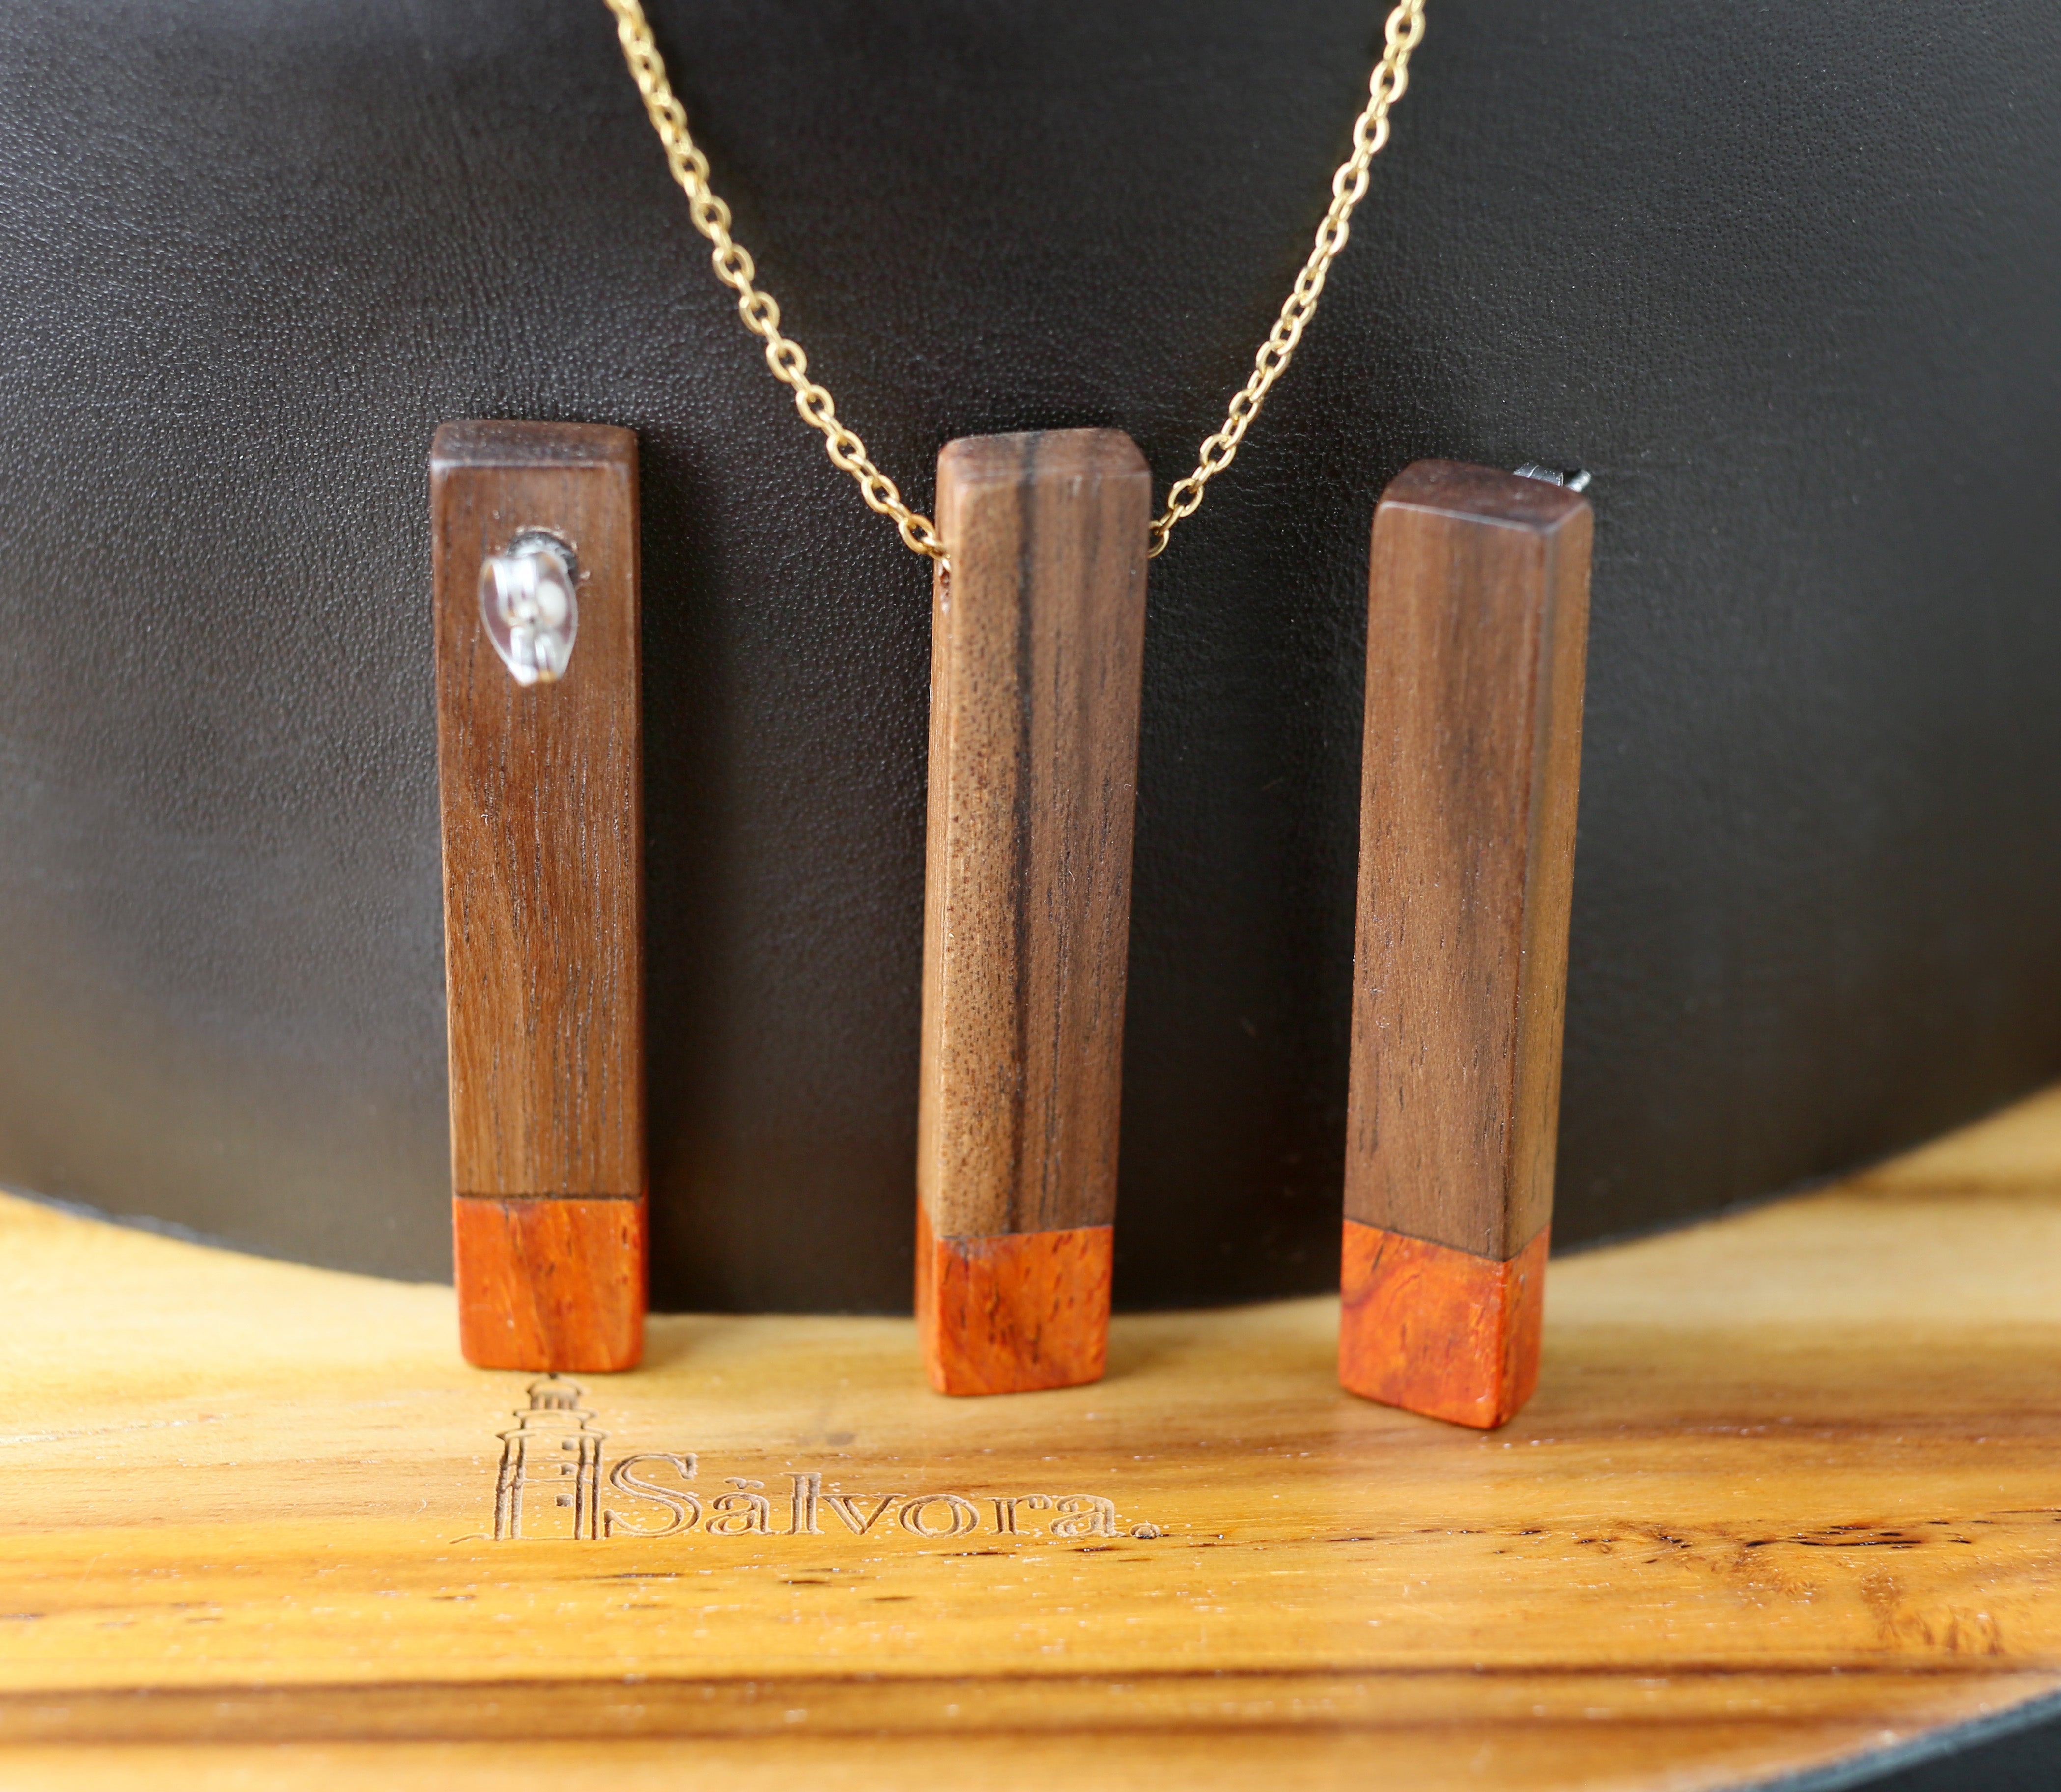 Wood jewelry set with ethnic stud earrings and necklace. Mayan earrings in exotic woods, golden surgical steel and hypoallergenic studs